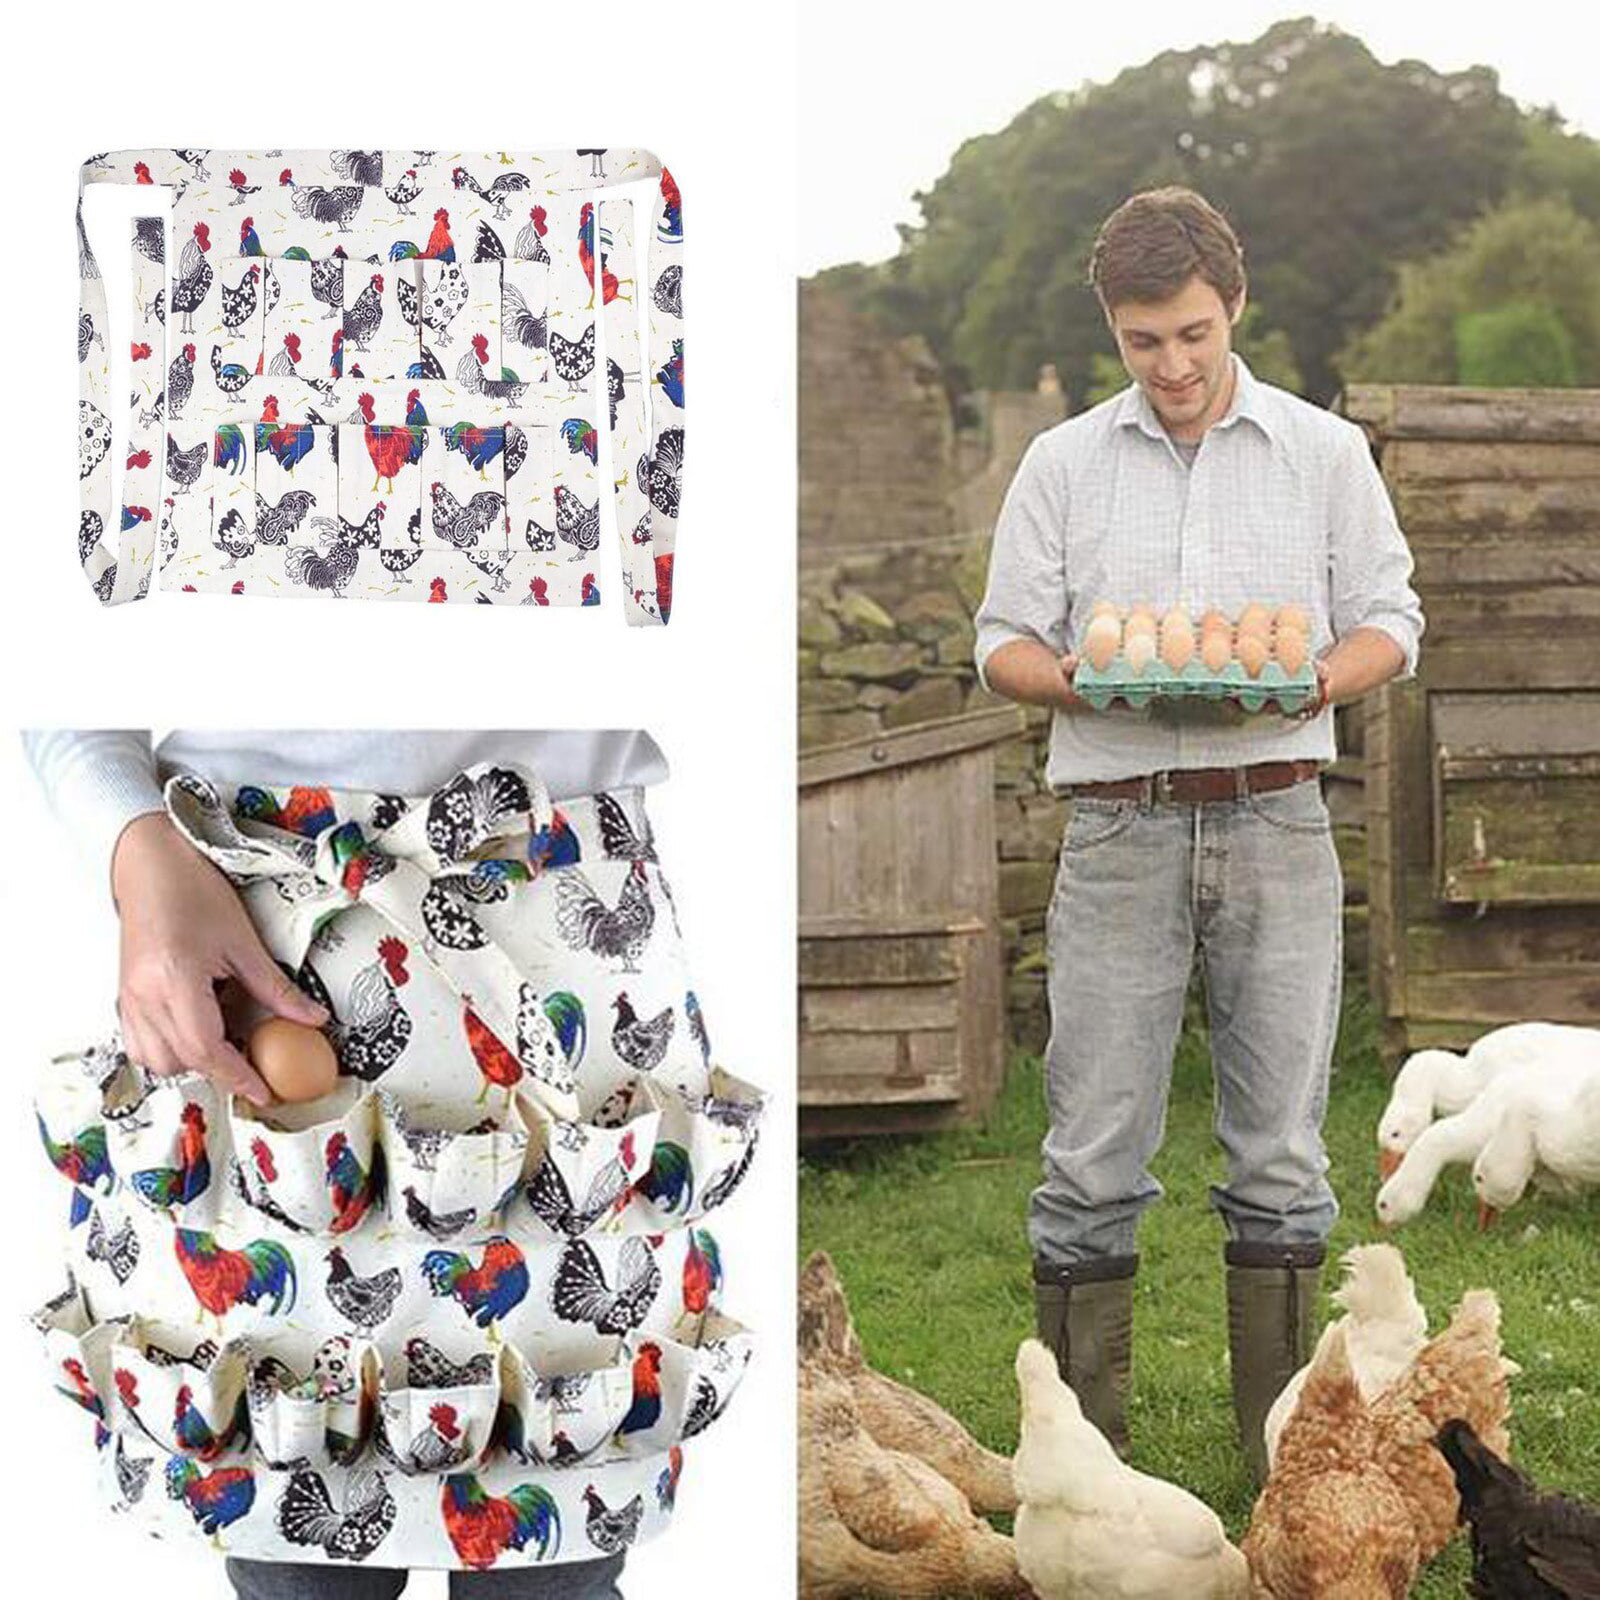 Chicken Egg Apron Gathering Egg Apron with Pockets for 12 – Egg Collecting  Apron Adult Egg Gathering Apron